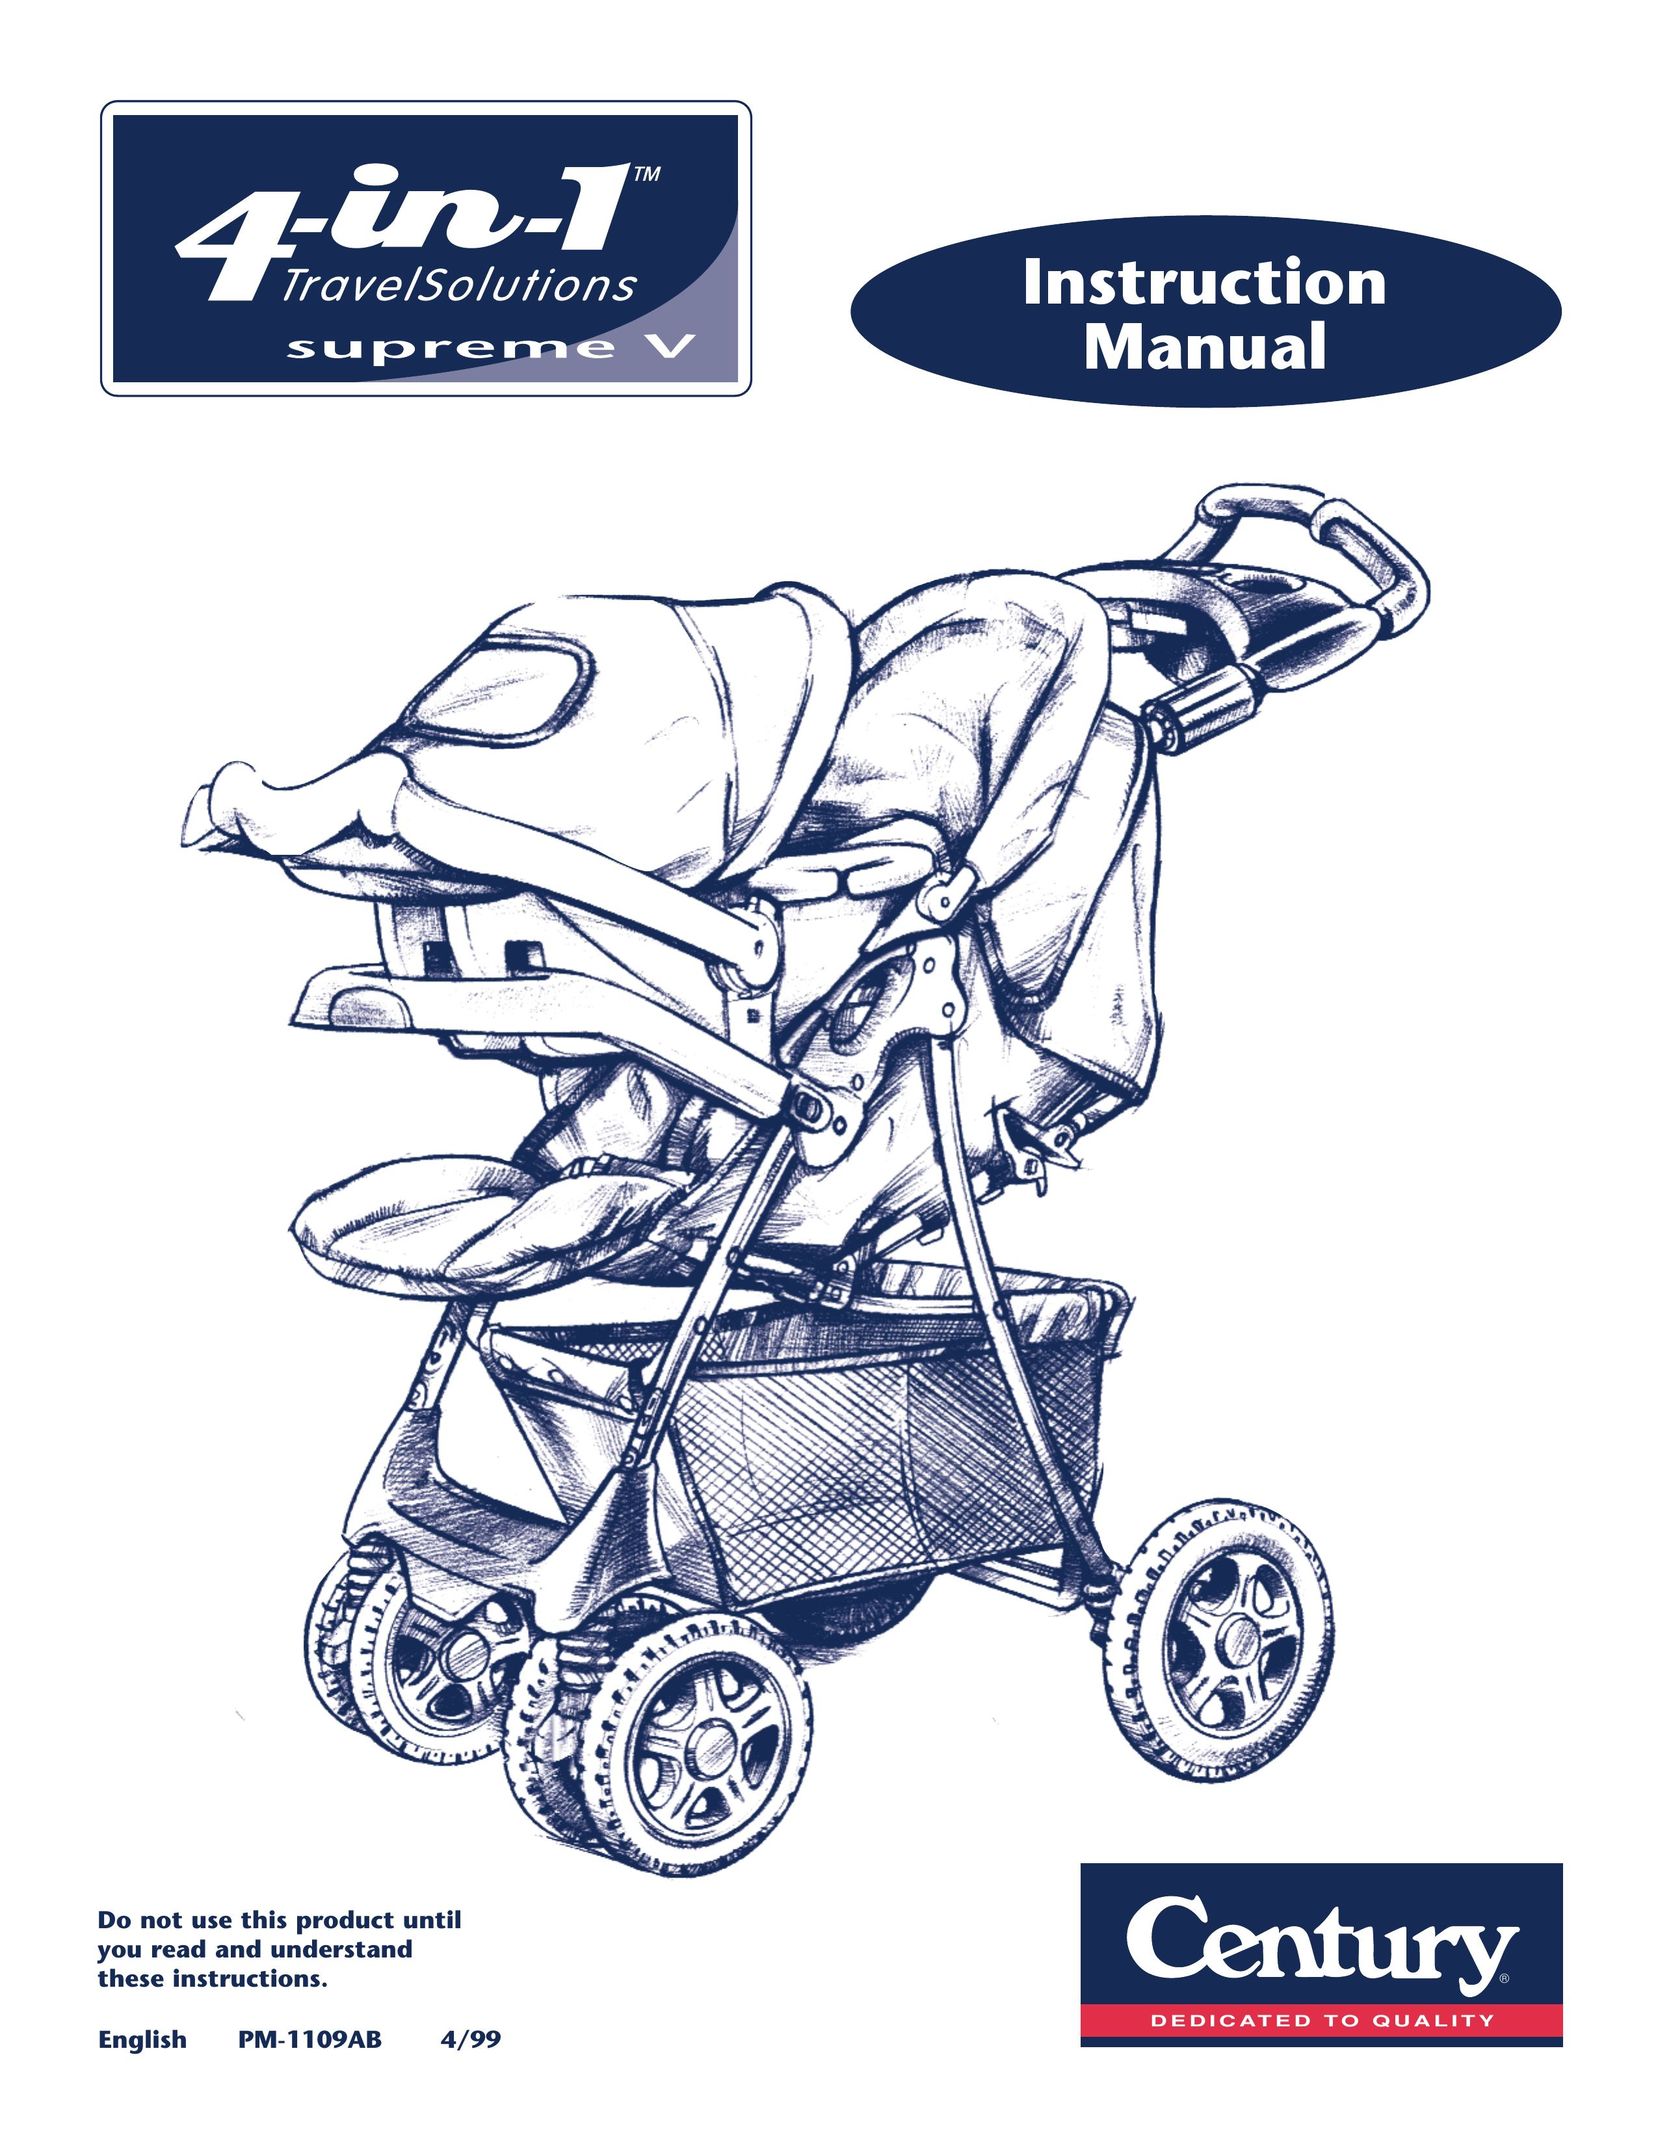 Century PM-1109AB Baby Carrier User Manual (Page 1)